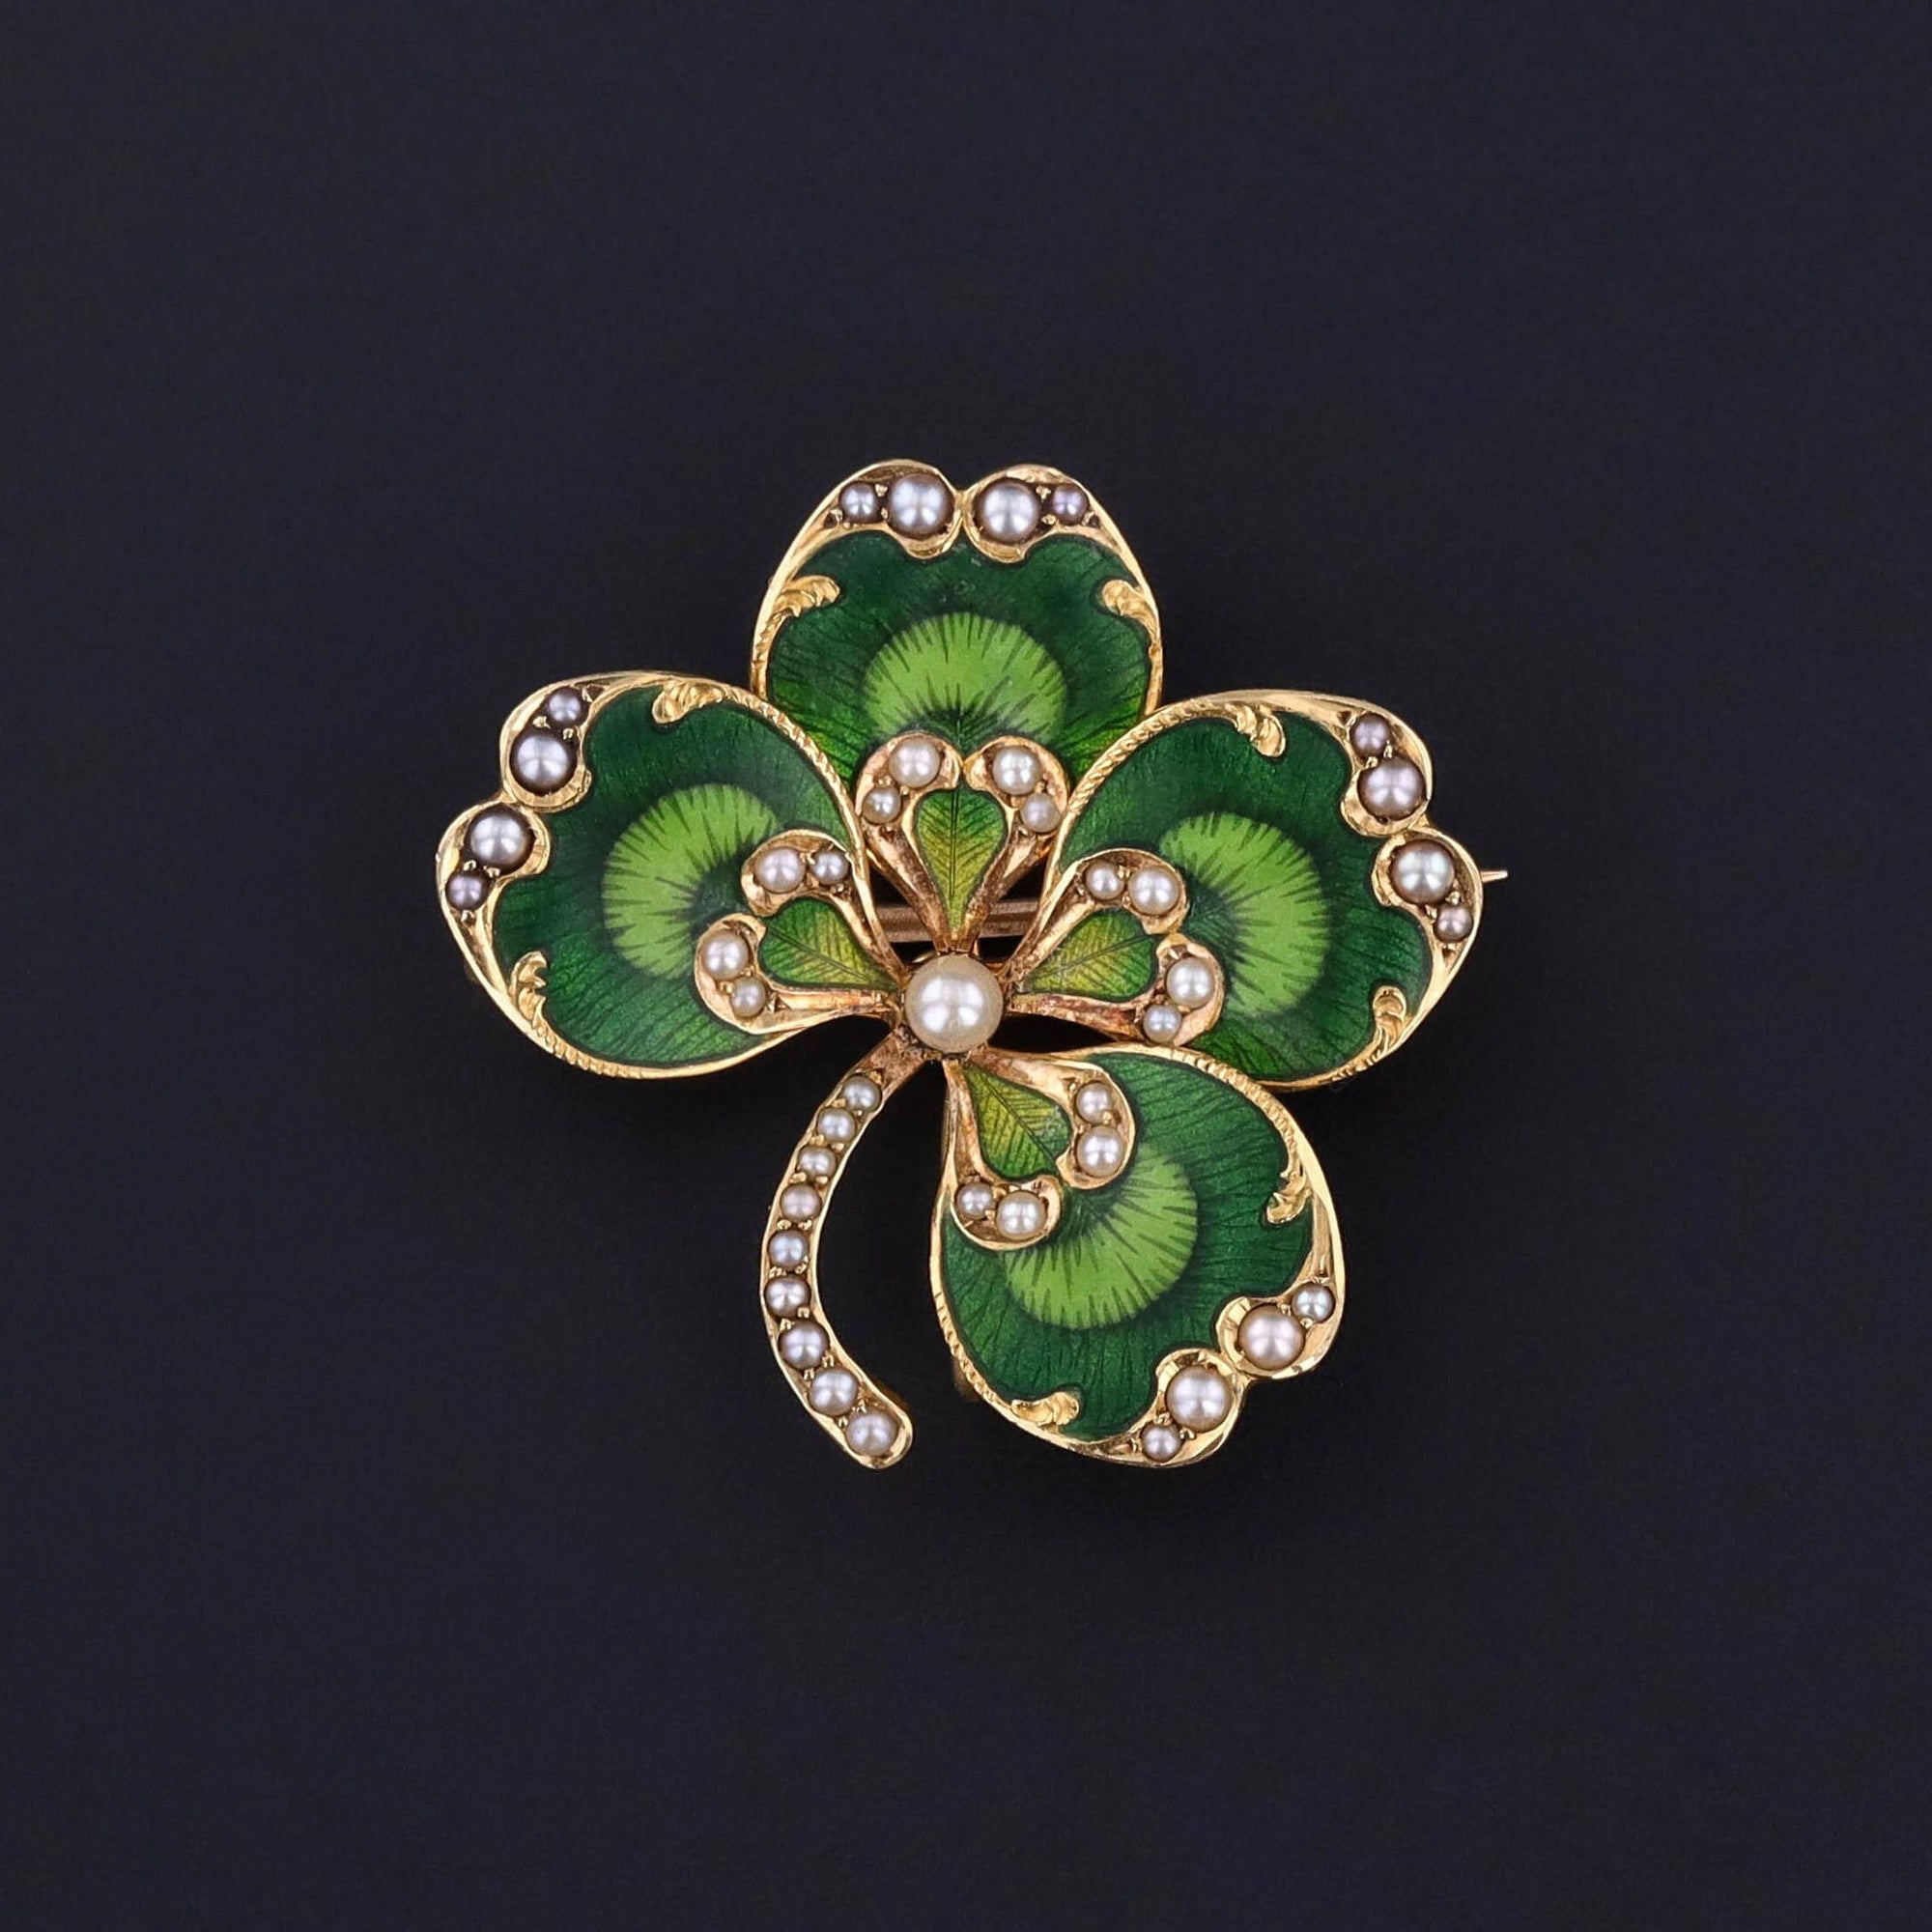 A striking antique clover dating to the early 1900s. The piece is adorned with vibrant green enamel and lustrous half pearls. It bears a pin and a collapsible bail allowing it to be worn either as a brooch or a pendant.